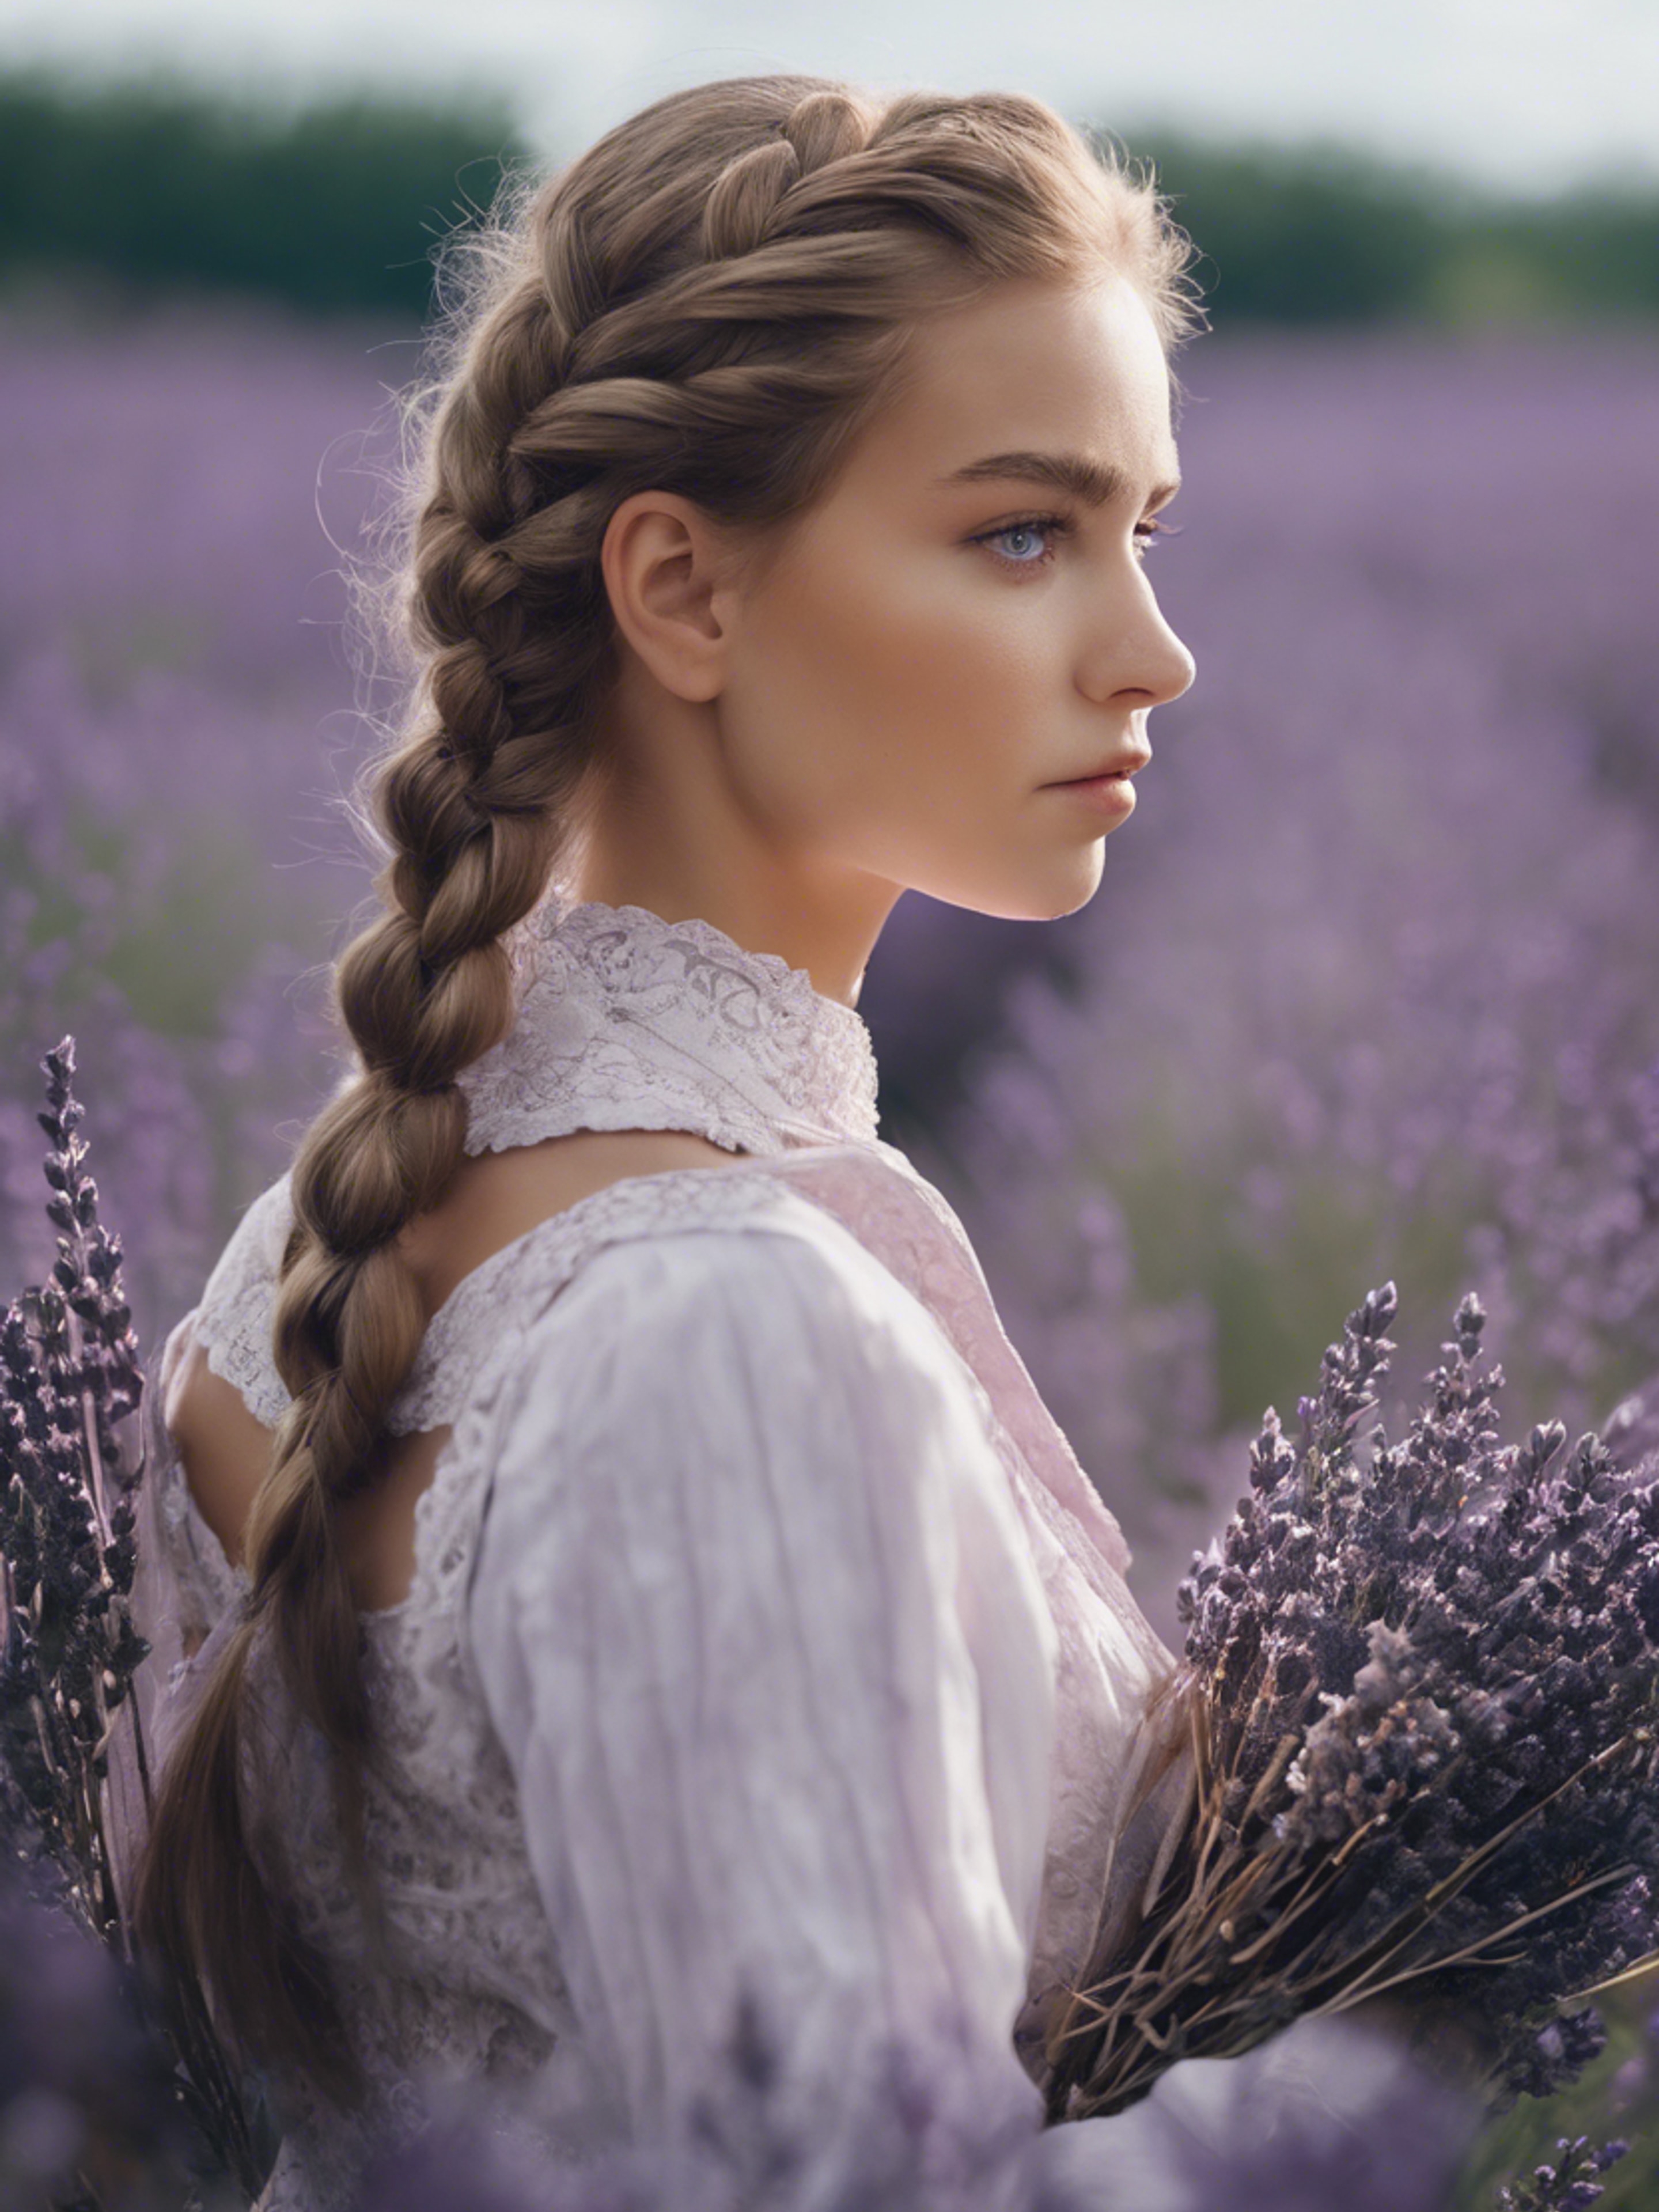 A pretty, light-eyed girl with her hair done in classic French braid, surrounded by a field of French lavender. duvar kağıdı[c71d23e36c7041a09435]